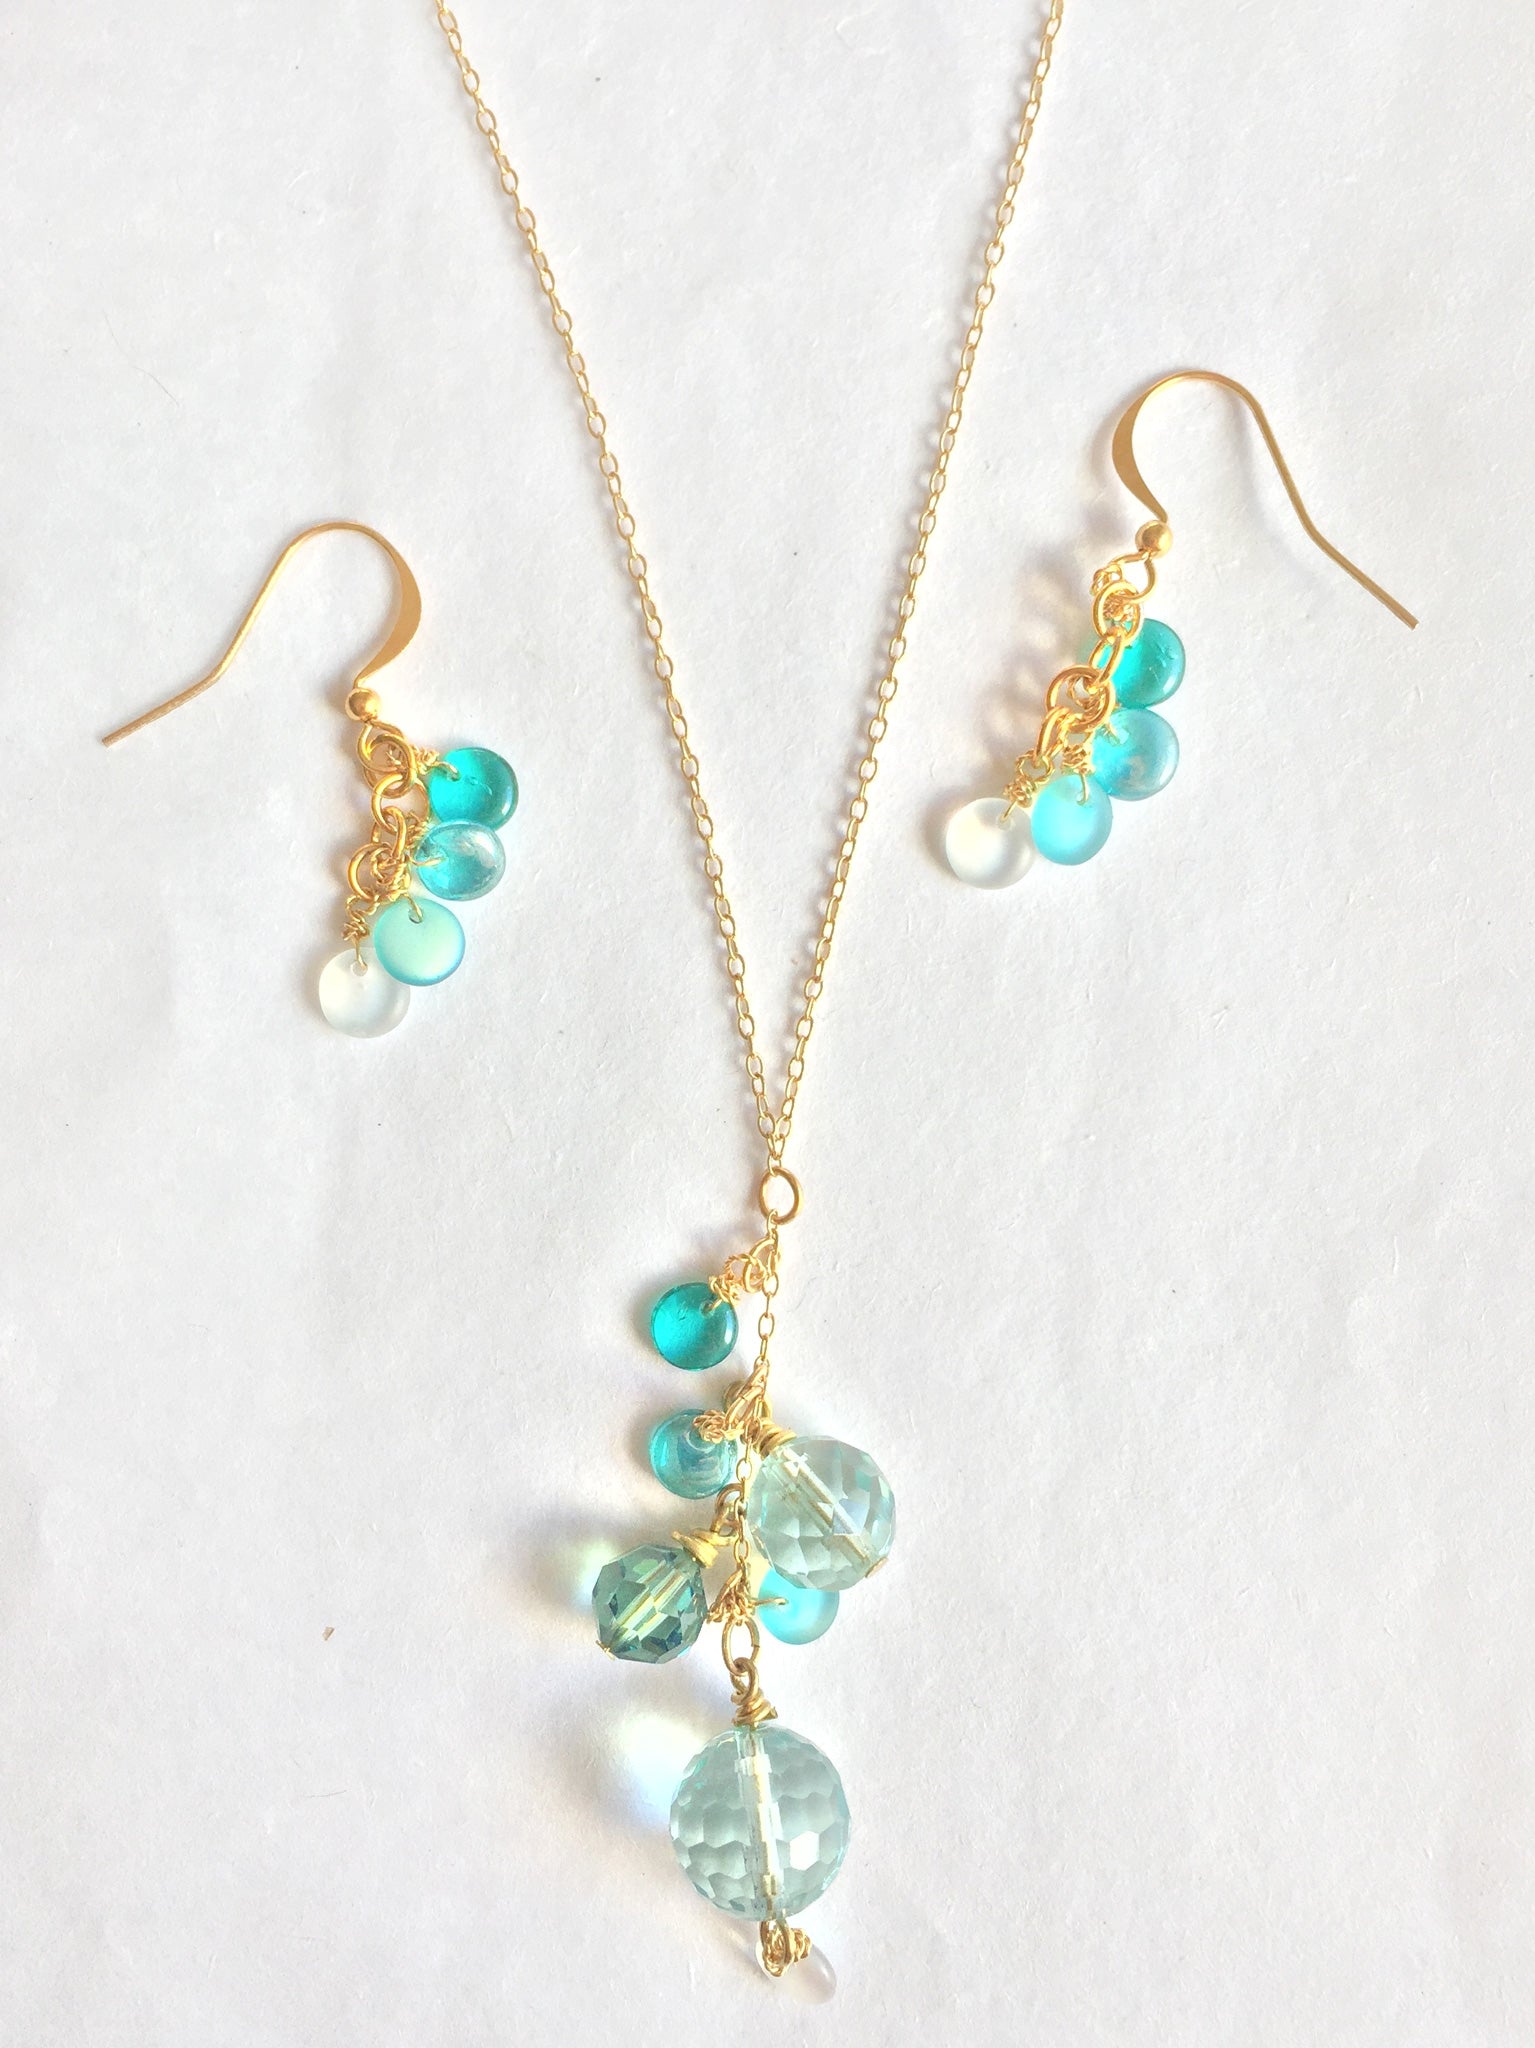 blue glass and gold necklace and earrings